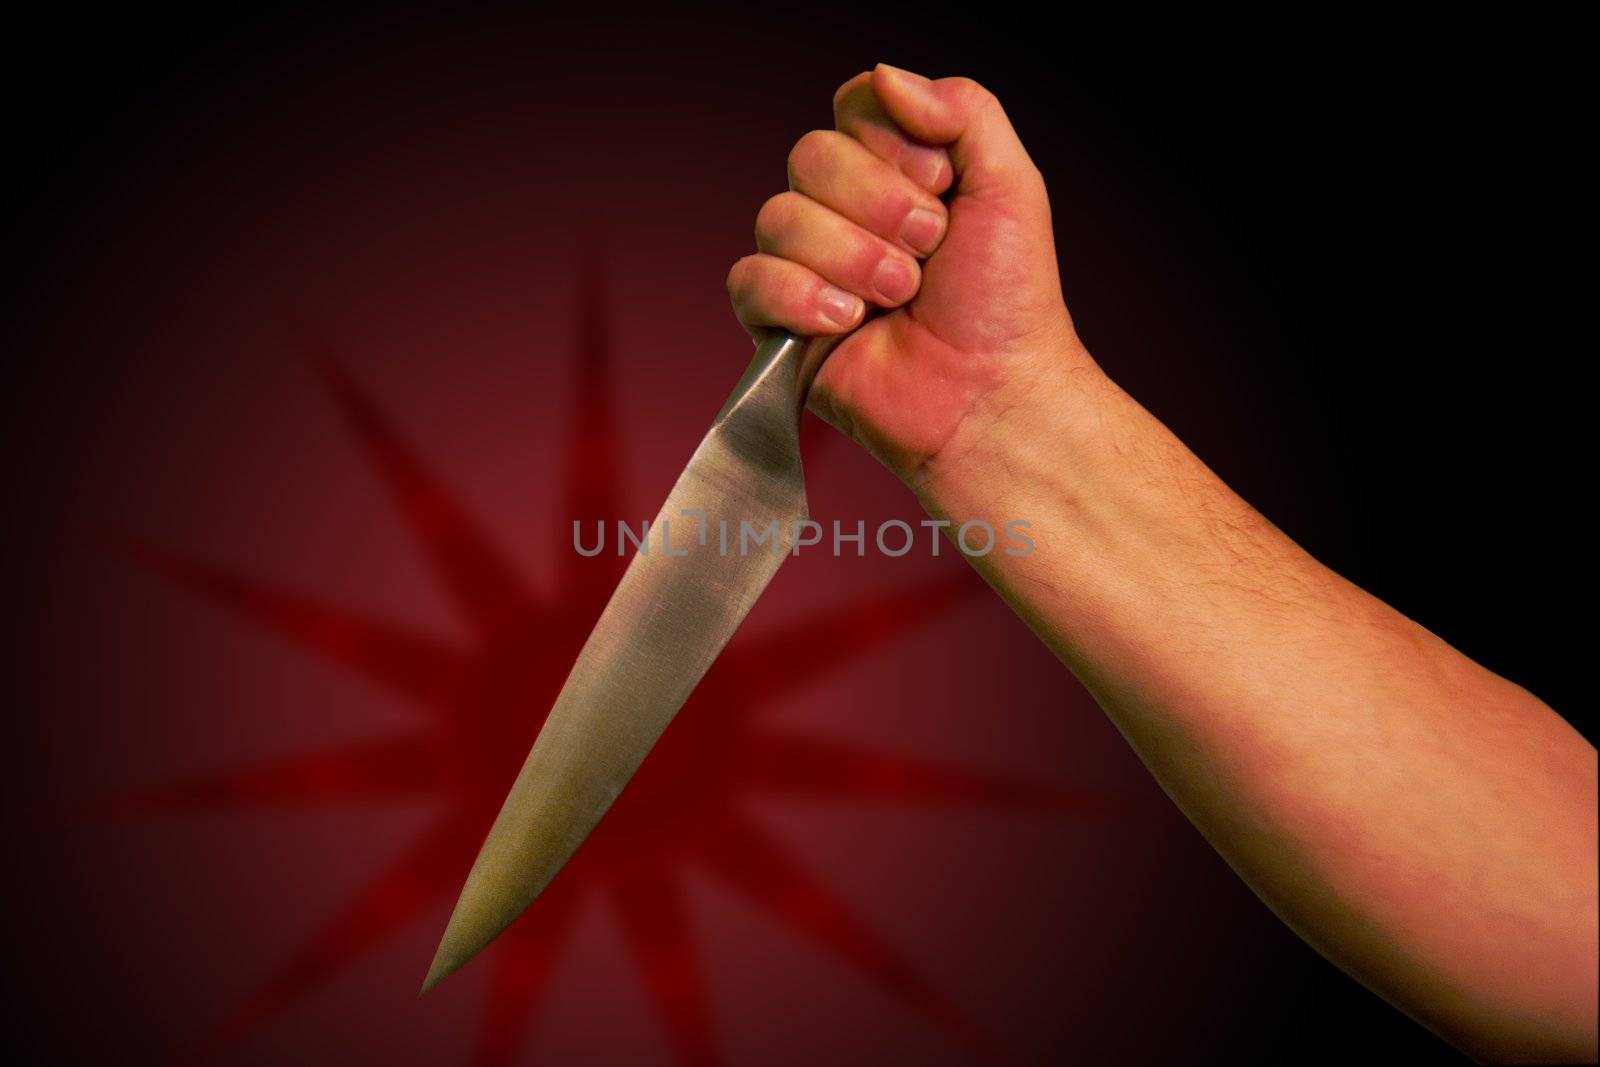 A hand holds a knife ready to stab. With clipping path so you can easily remove from background,